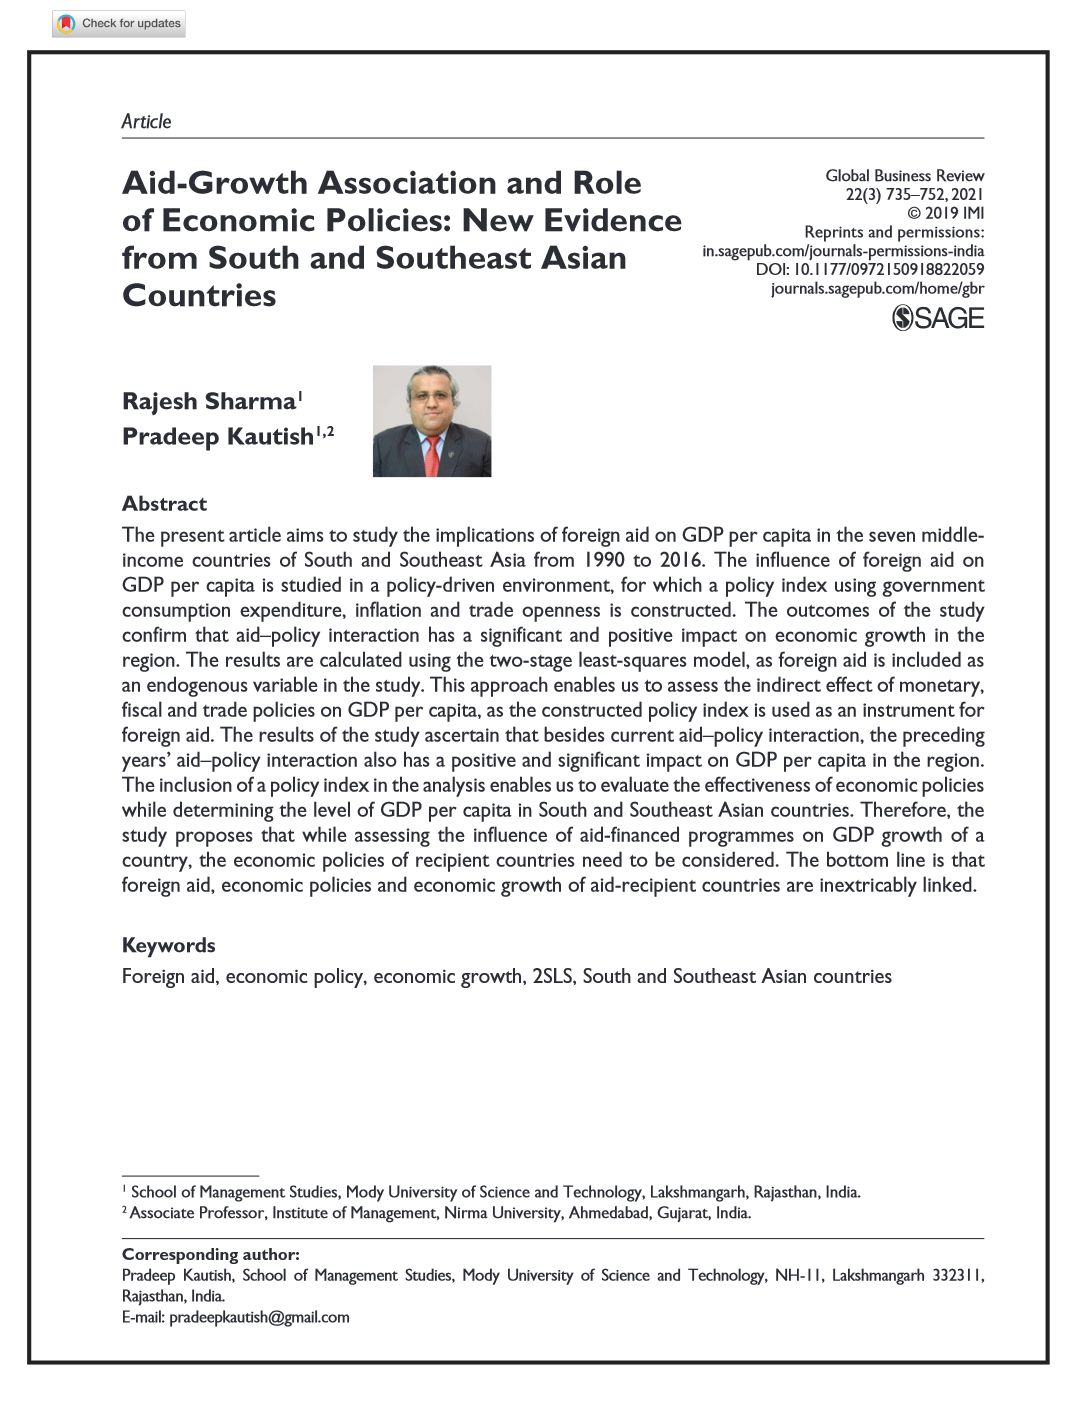 Aid-Growth Association and Role of Economic Policies: New Evidence from South and Southeast Asian Countries